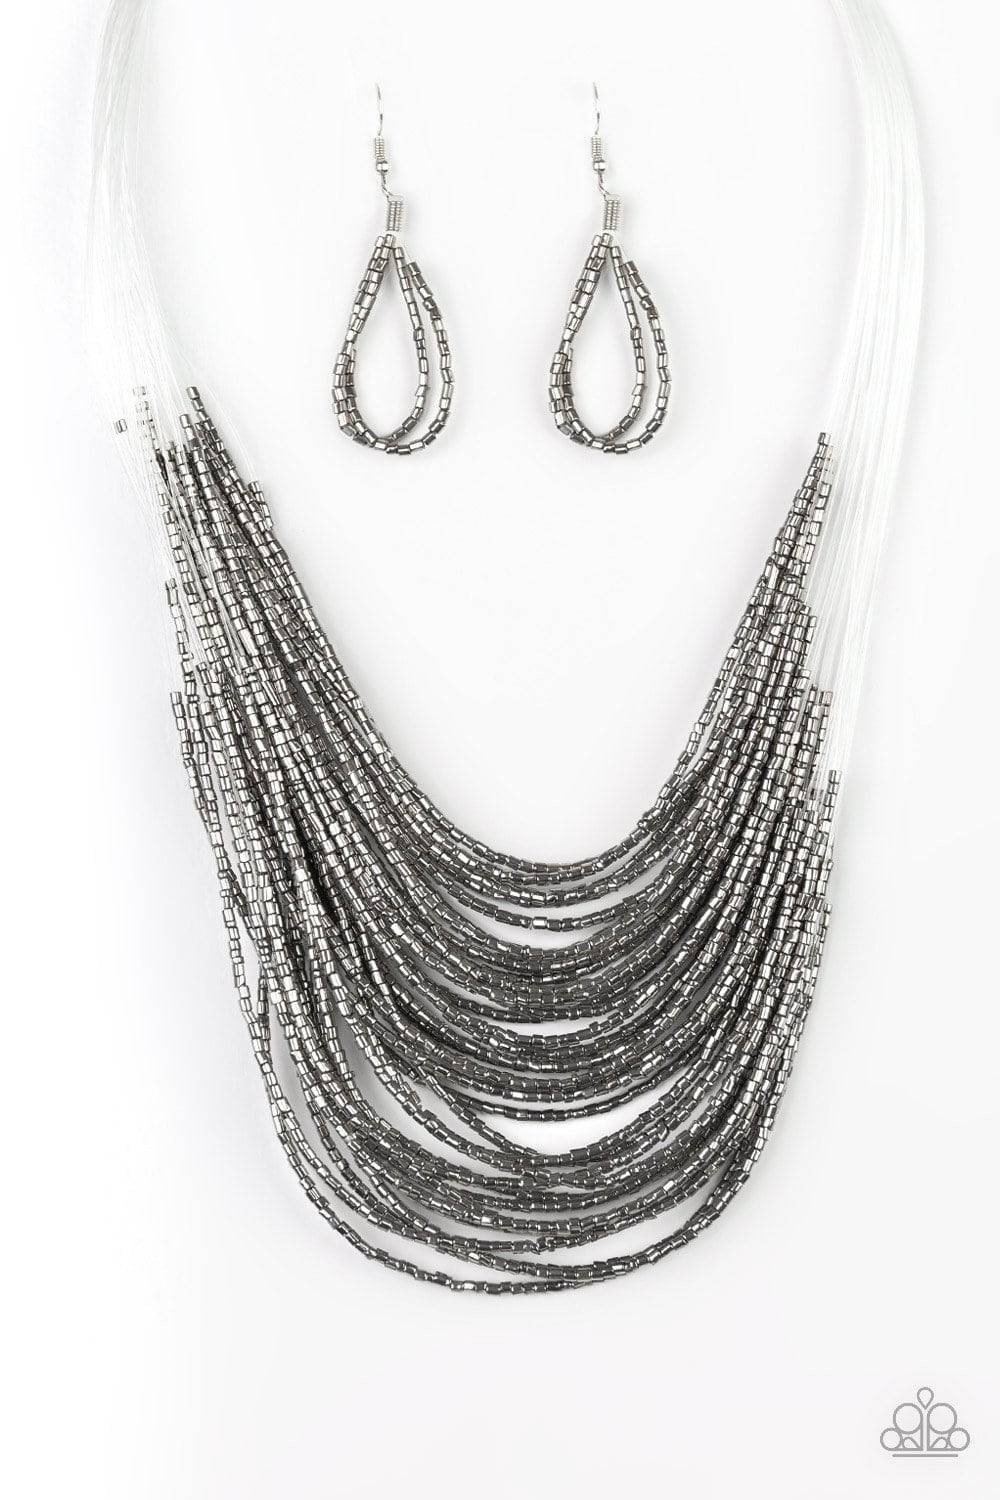 Catwalk Queen - Silver Seed Bead Necklace - Paparazzi Accessories - GlaMarous Titi Jewels